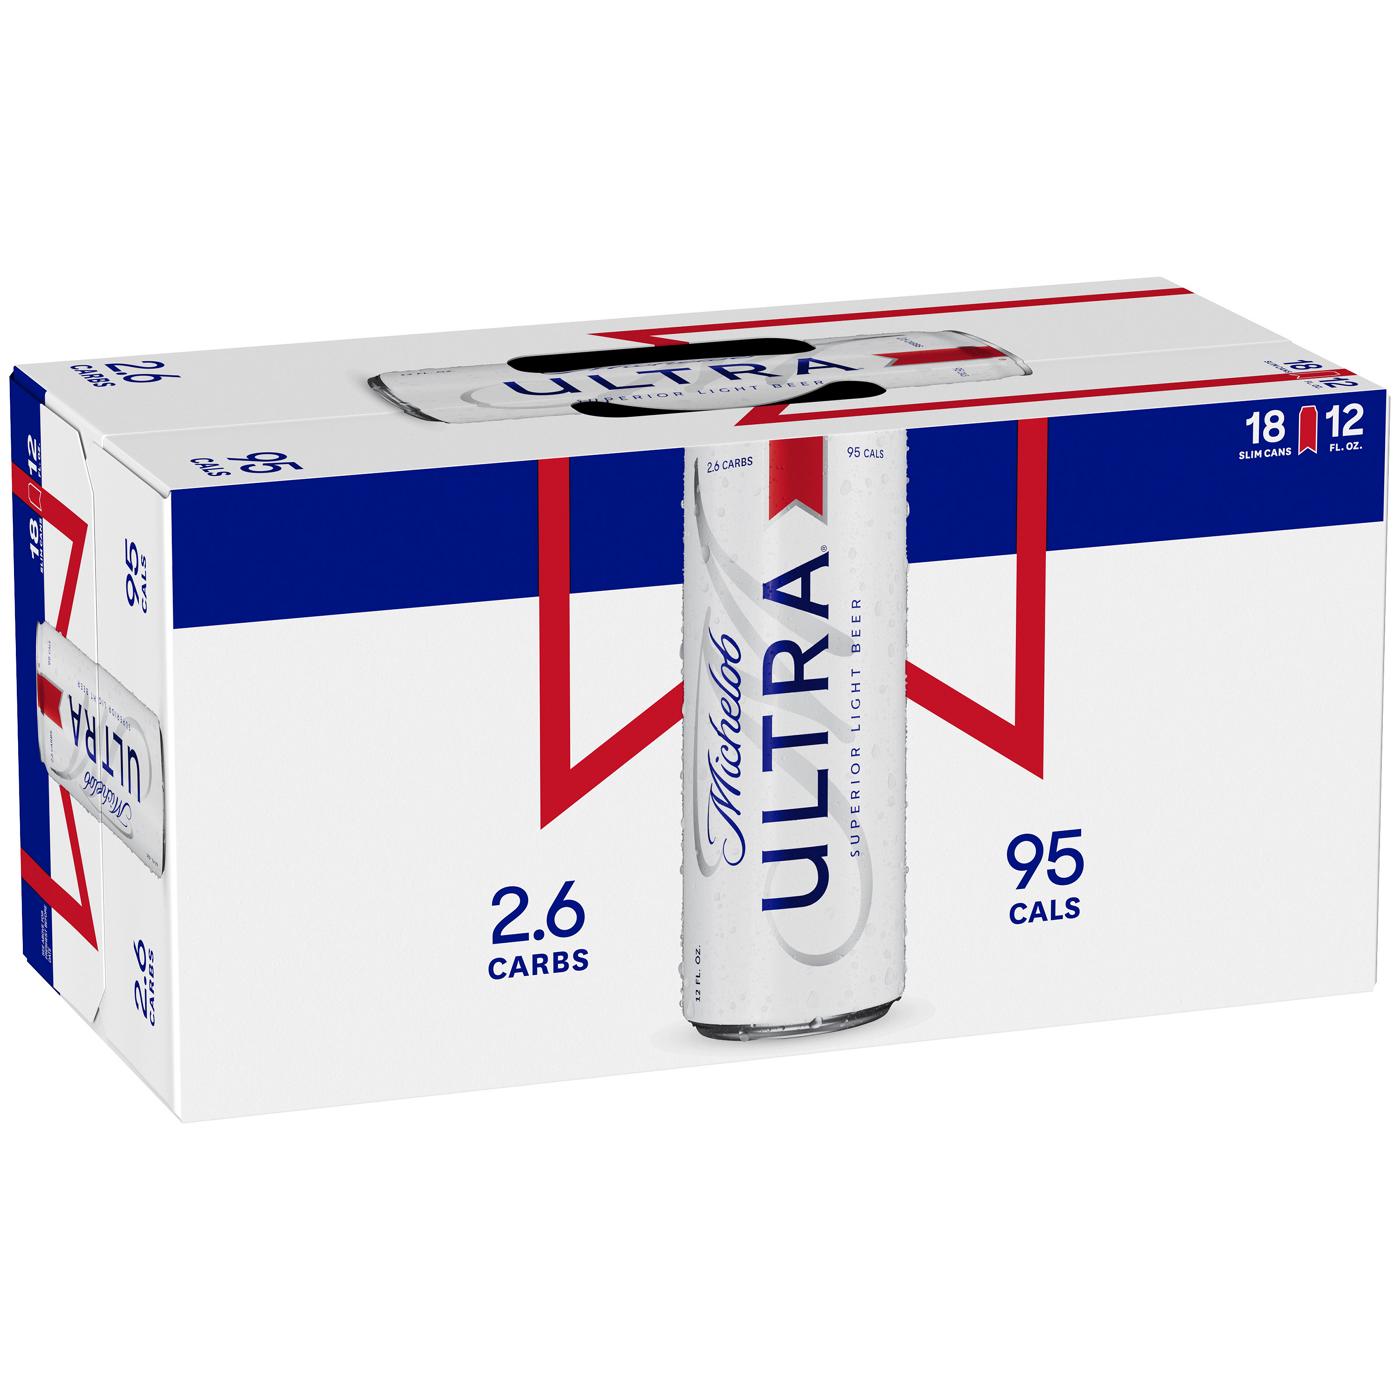 Michelob Ultra Beer 18 Pk Slim Cans